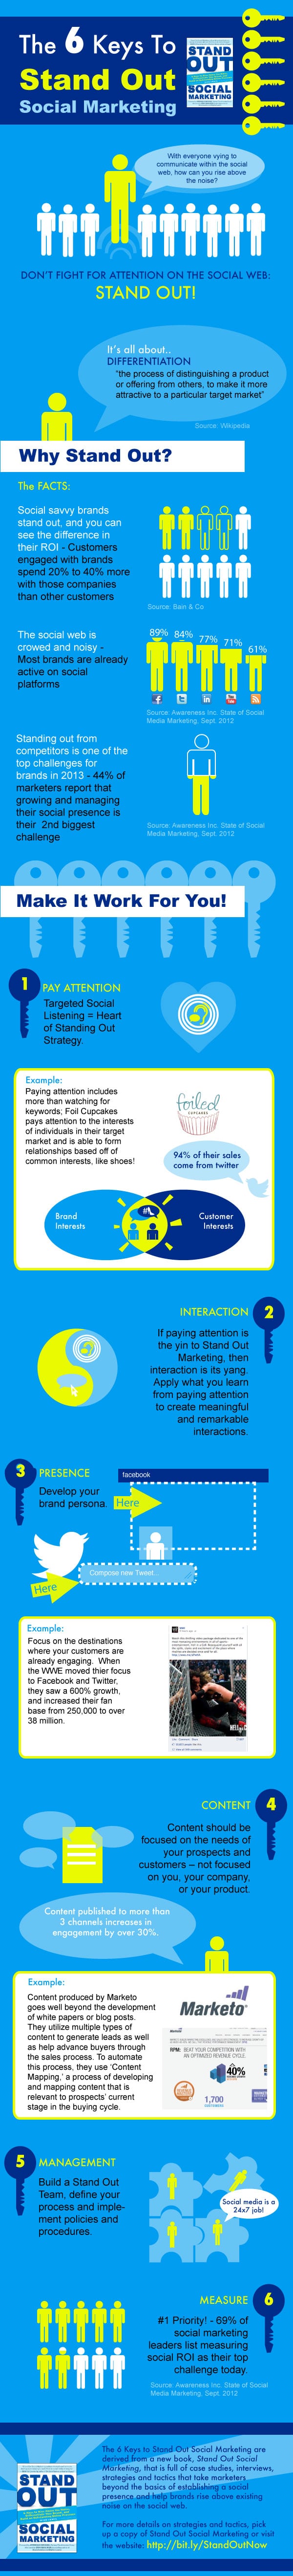 Getting Noticed: 6 Ways To Gain Social Media Attention [Infographic]